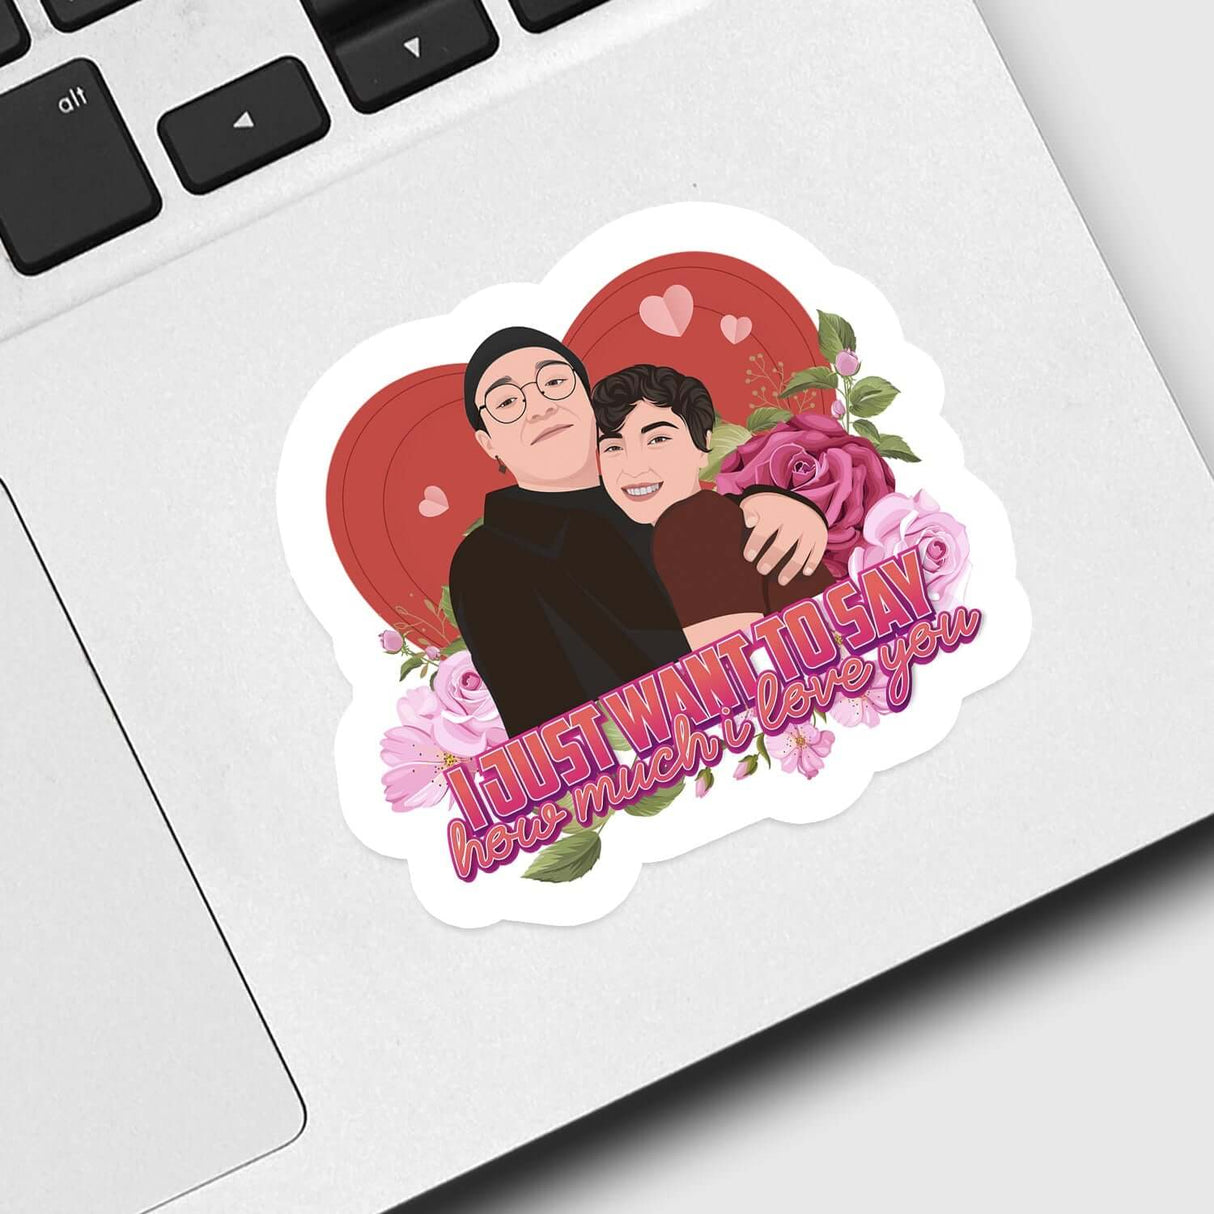 Just Want to Say I Love You Sticker Personalized